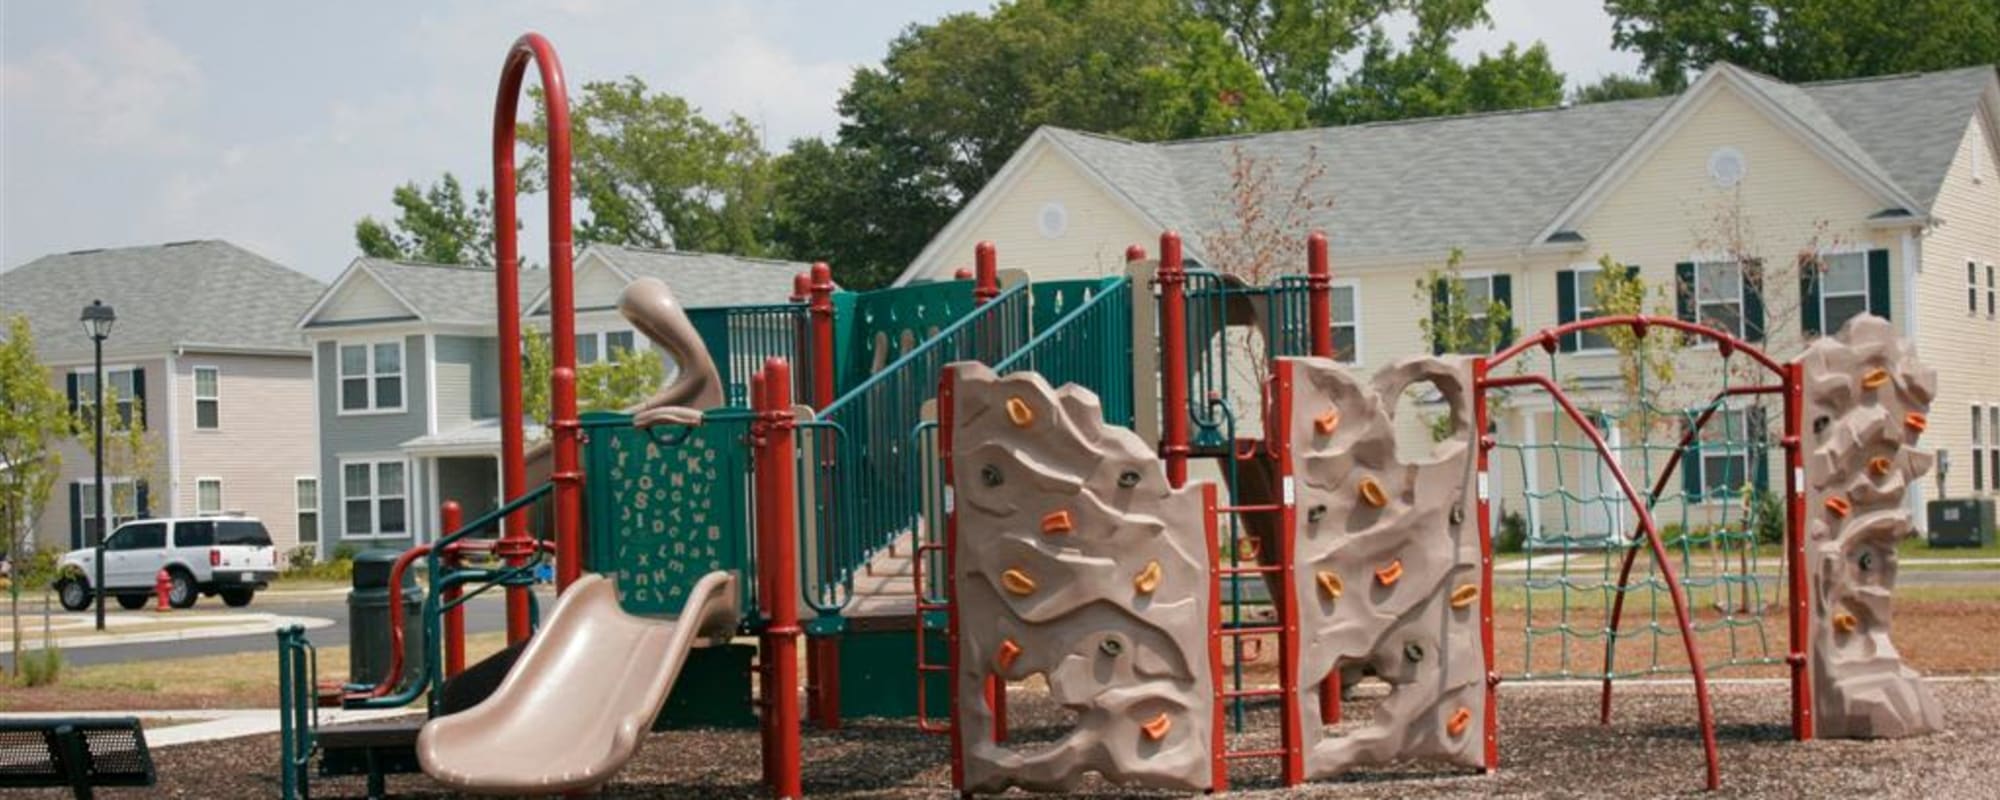 Playground at The Village at New Gosport in Portsmouth, Virginia